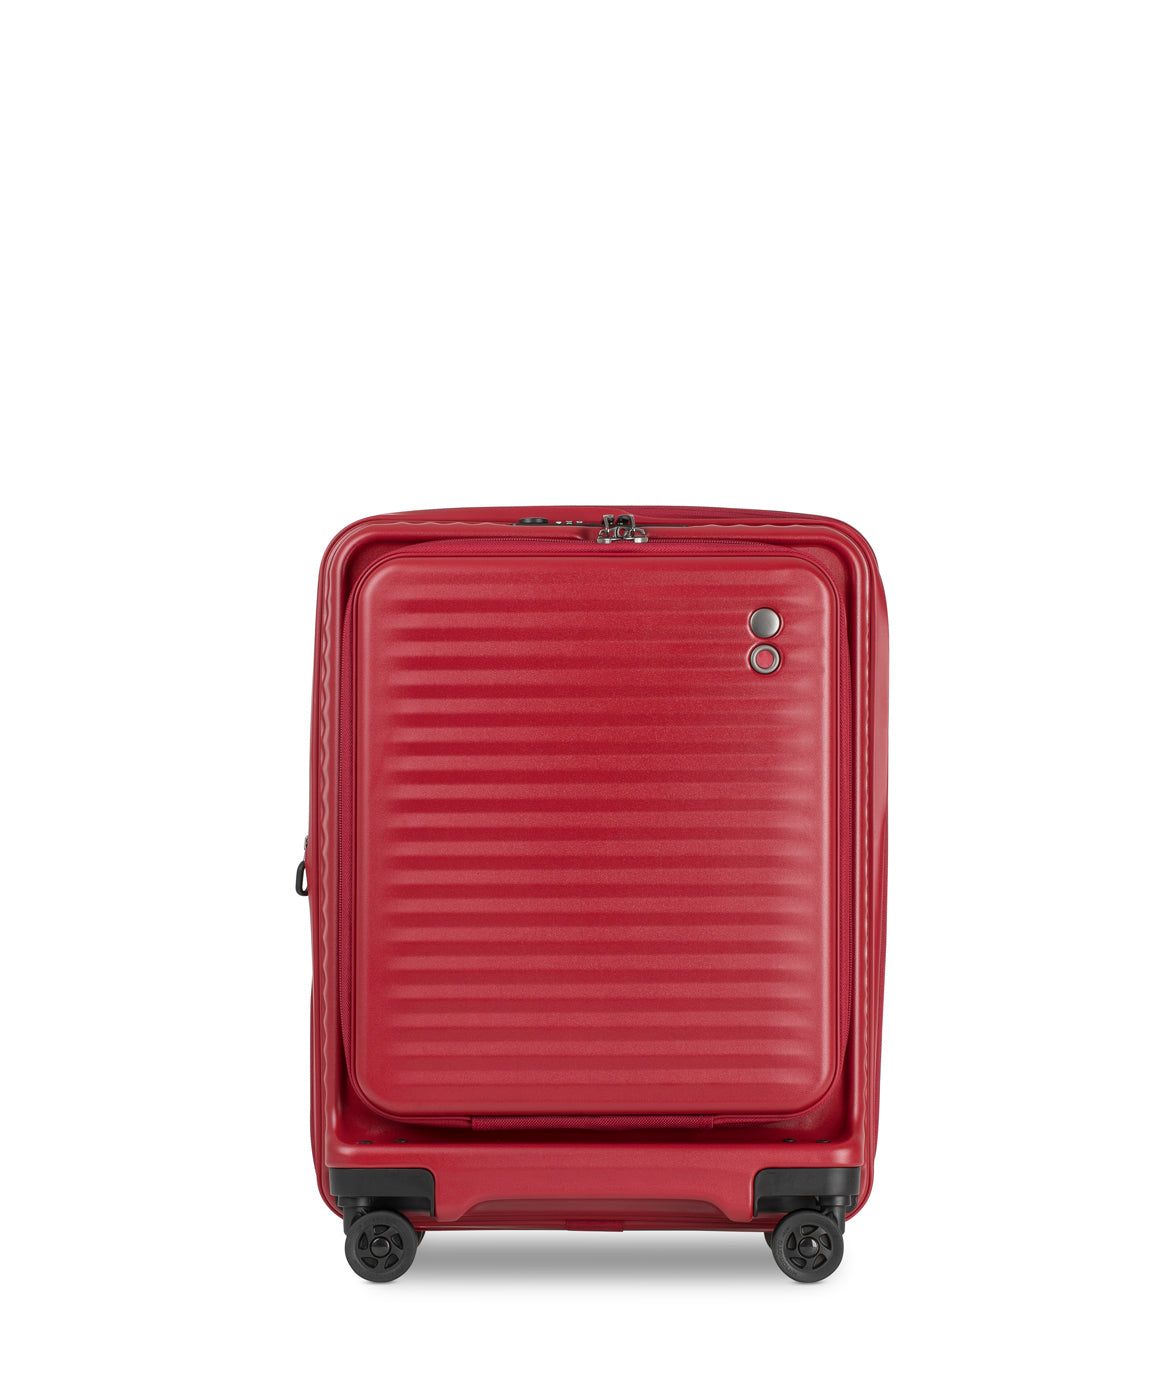 Echolac Celestra Suitcase, Small 55 cm, Red Front